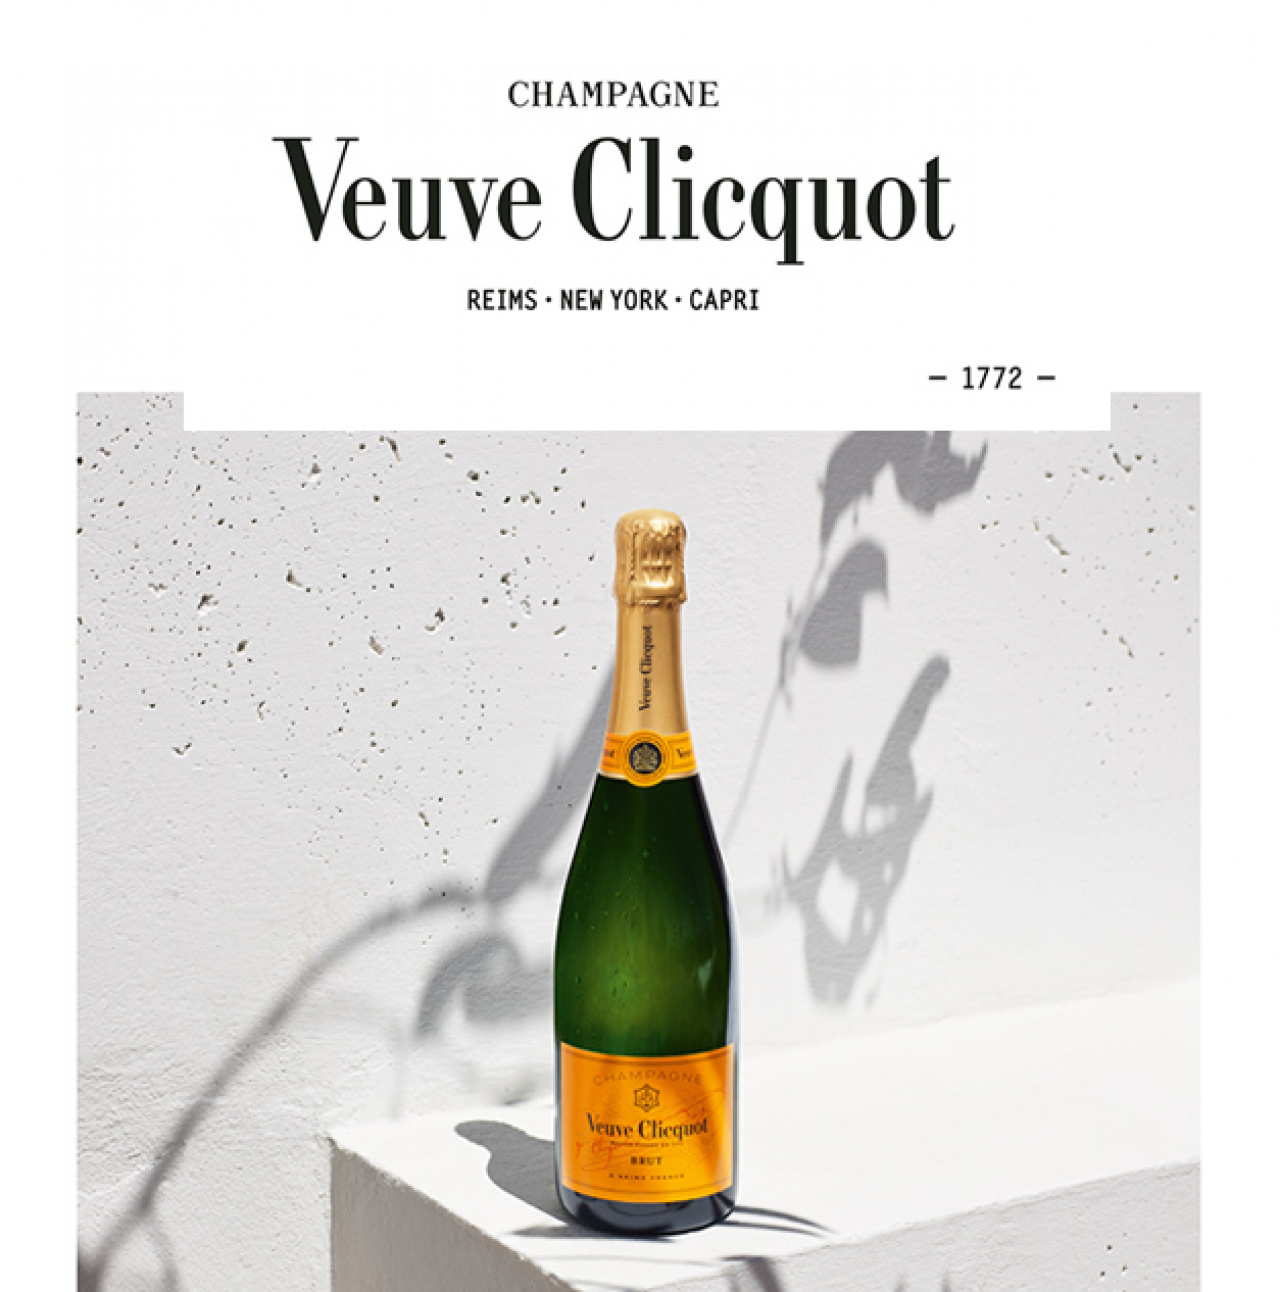 VEUVE CLICQUOT  Moët Hennessy Diageo Hong Kong Limited